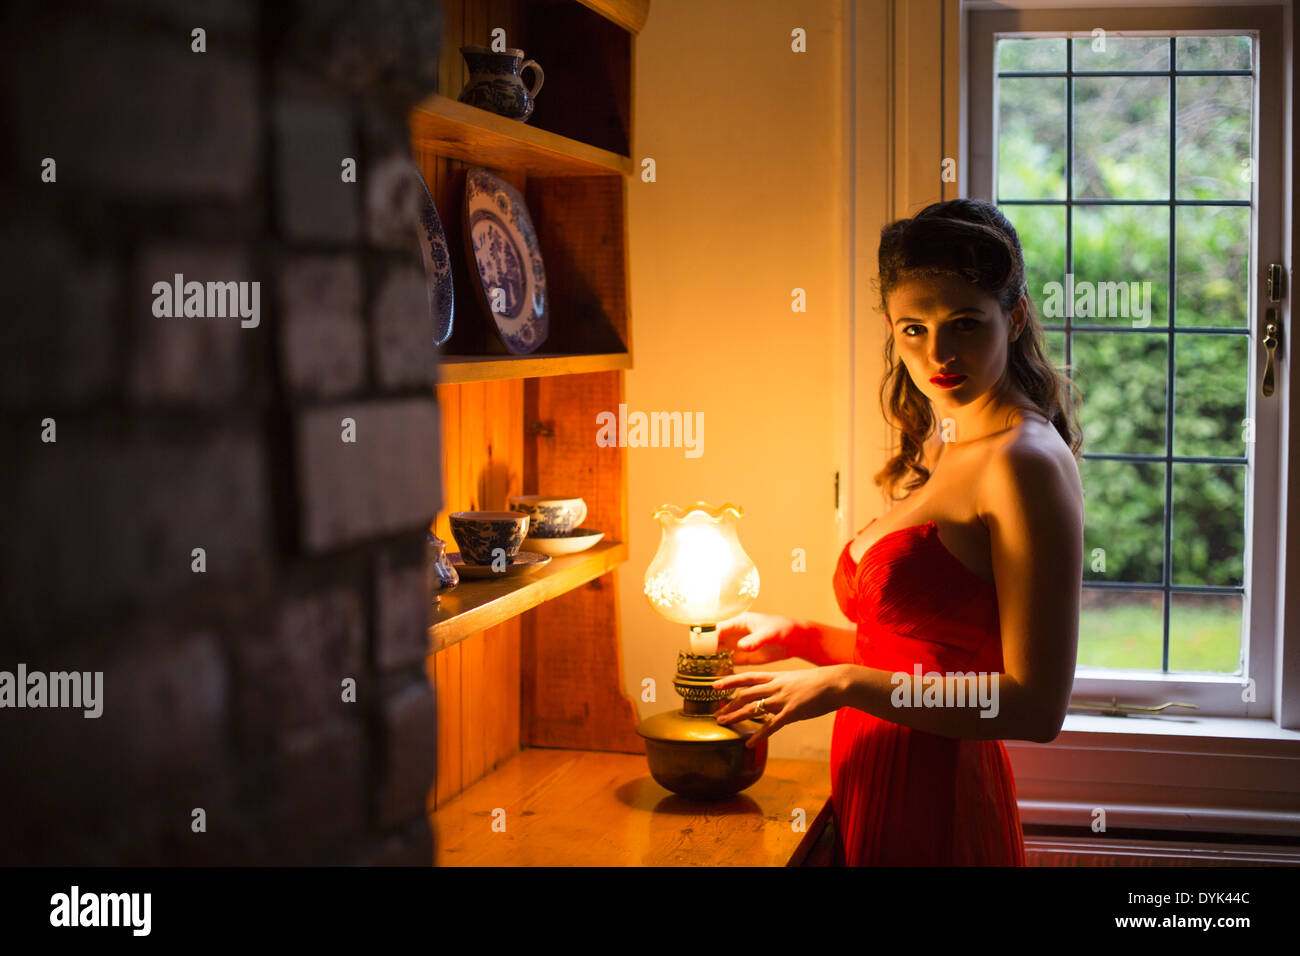 Young woman in an orange, strapless evening dress in front of an old dresser. Stock Photo